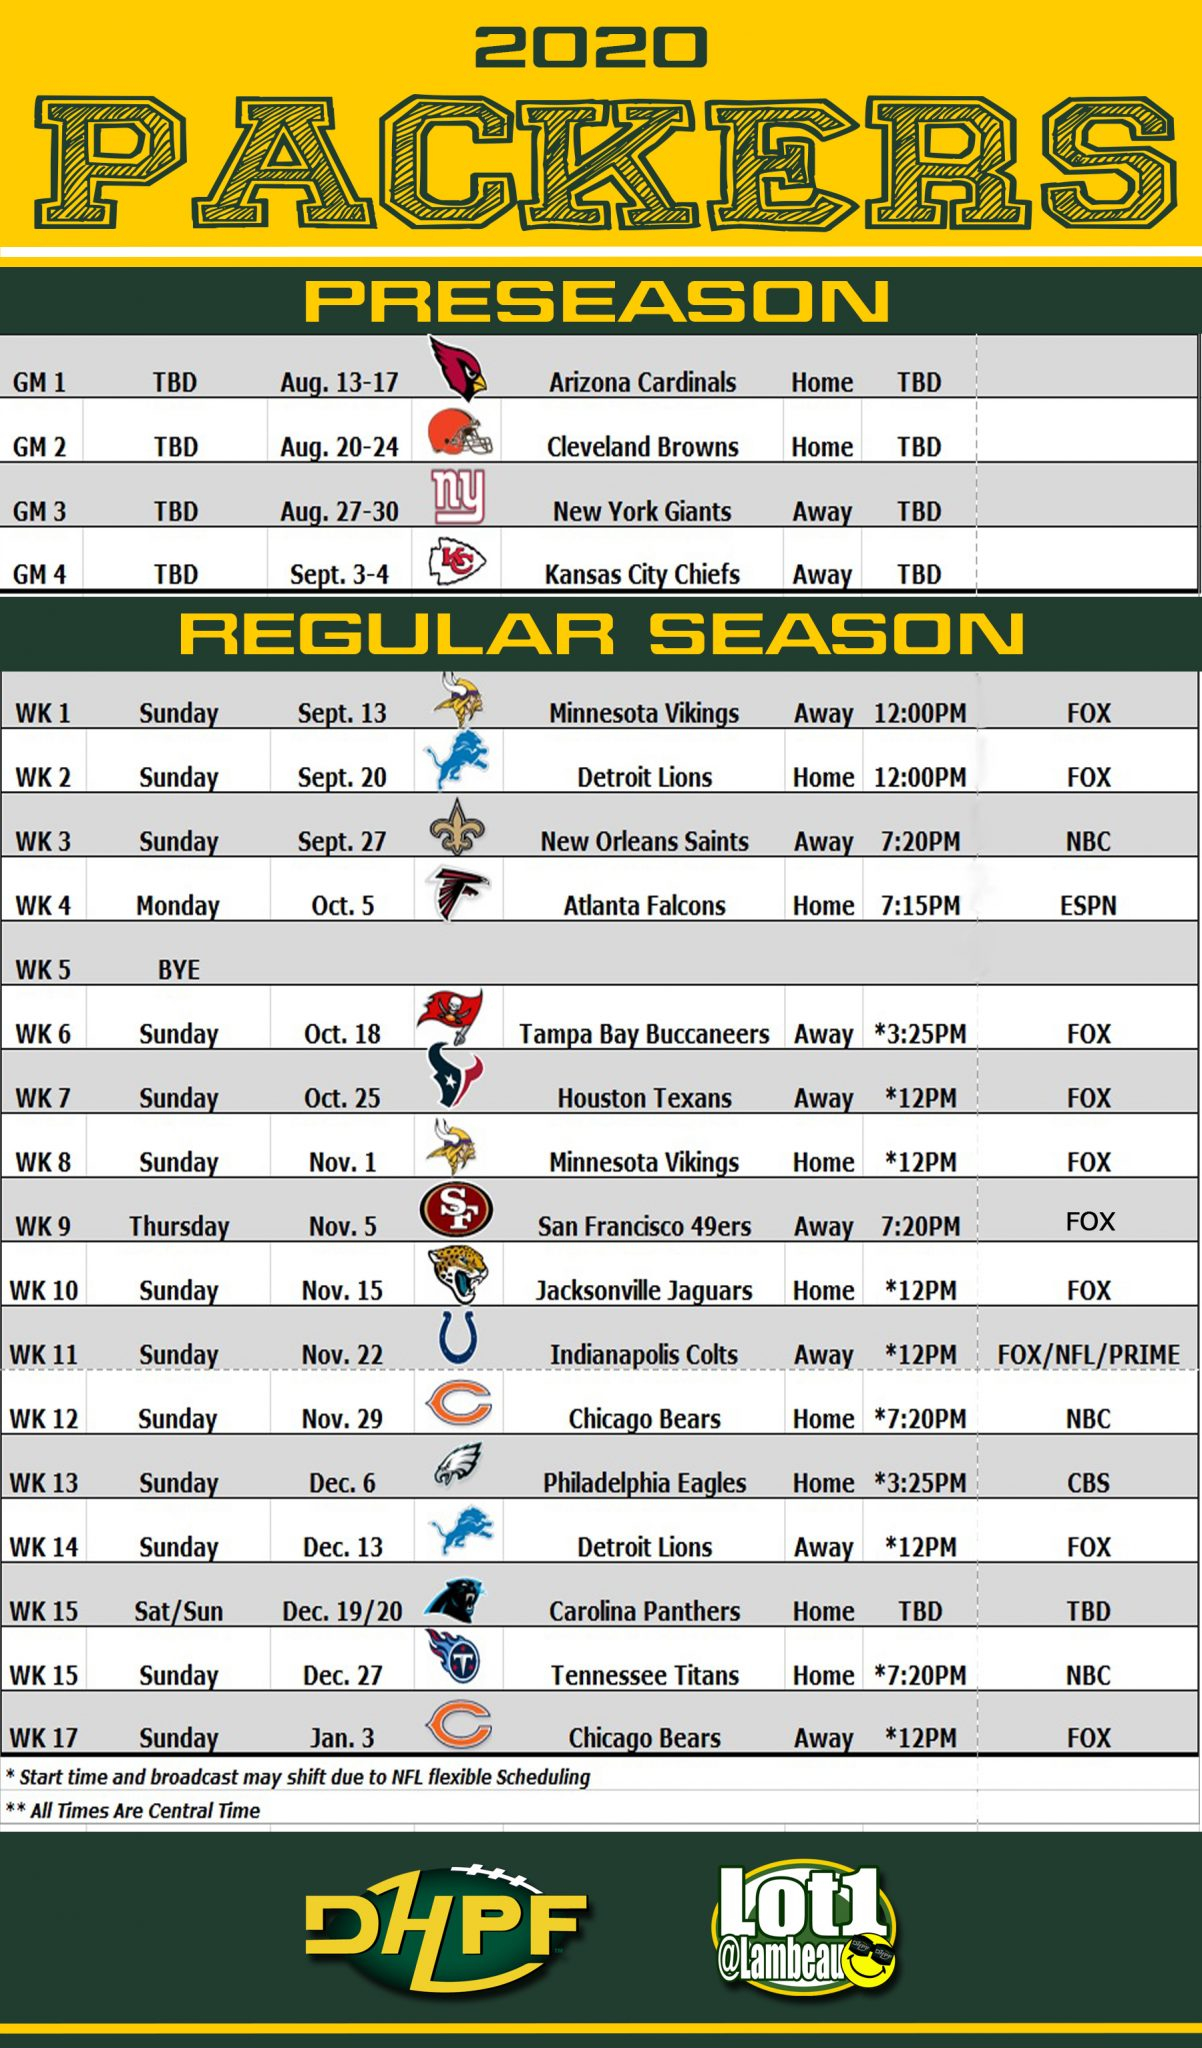 The Packers 2020 Schedule And Thoughts Die Hard Packer Fan